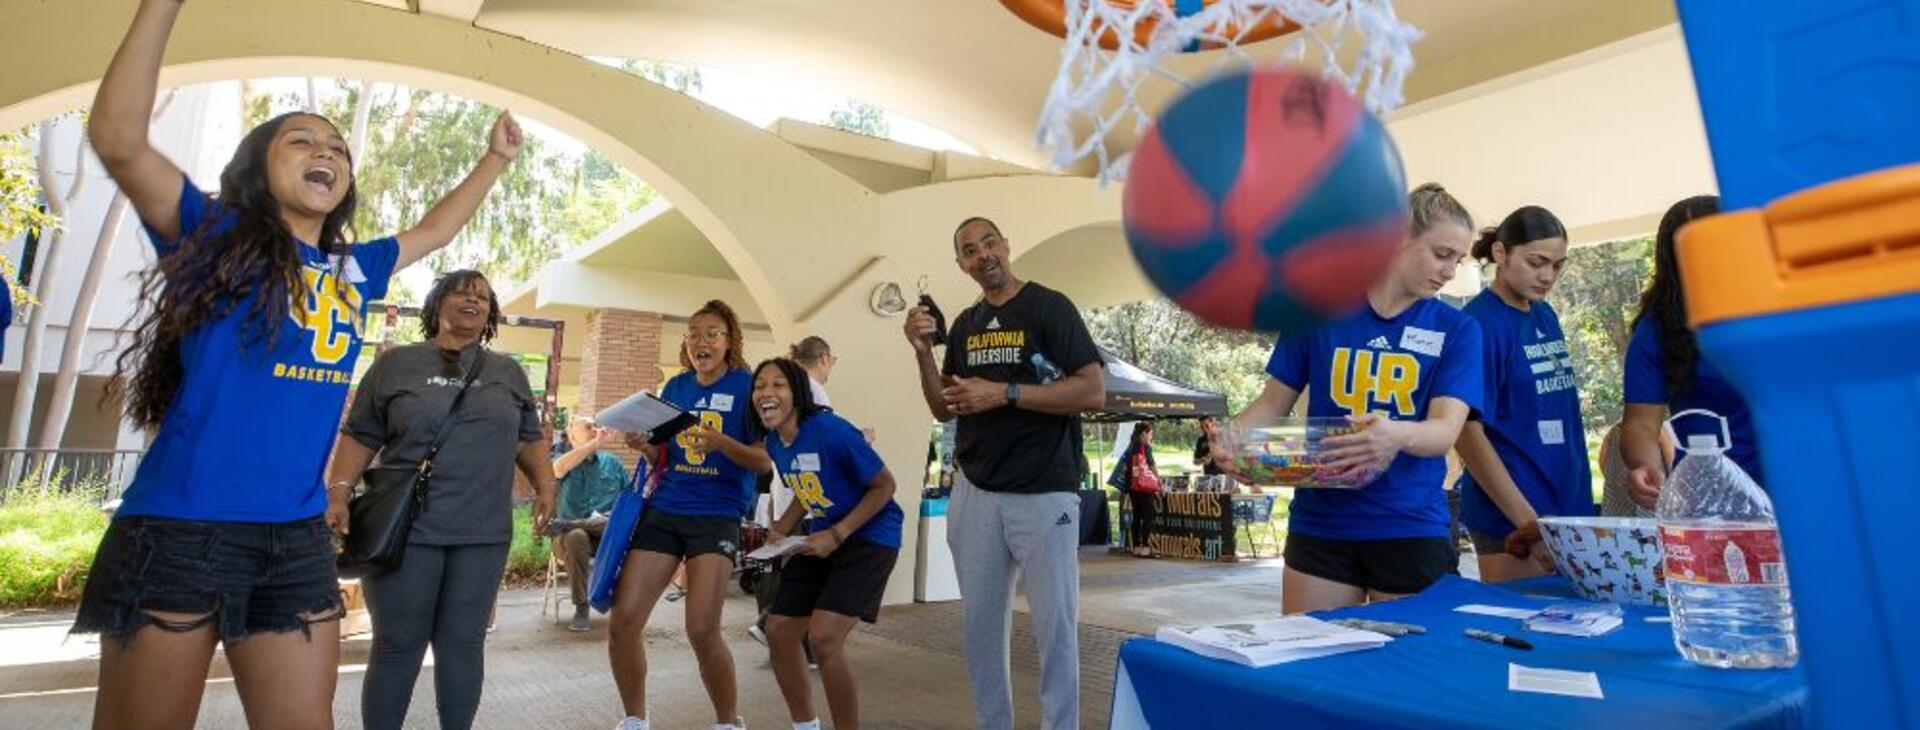 UCR Women's Basketball cheering as a Community Partner Fair attendee made their shot into the hoop